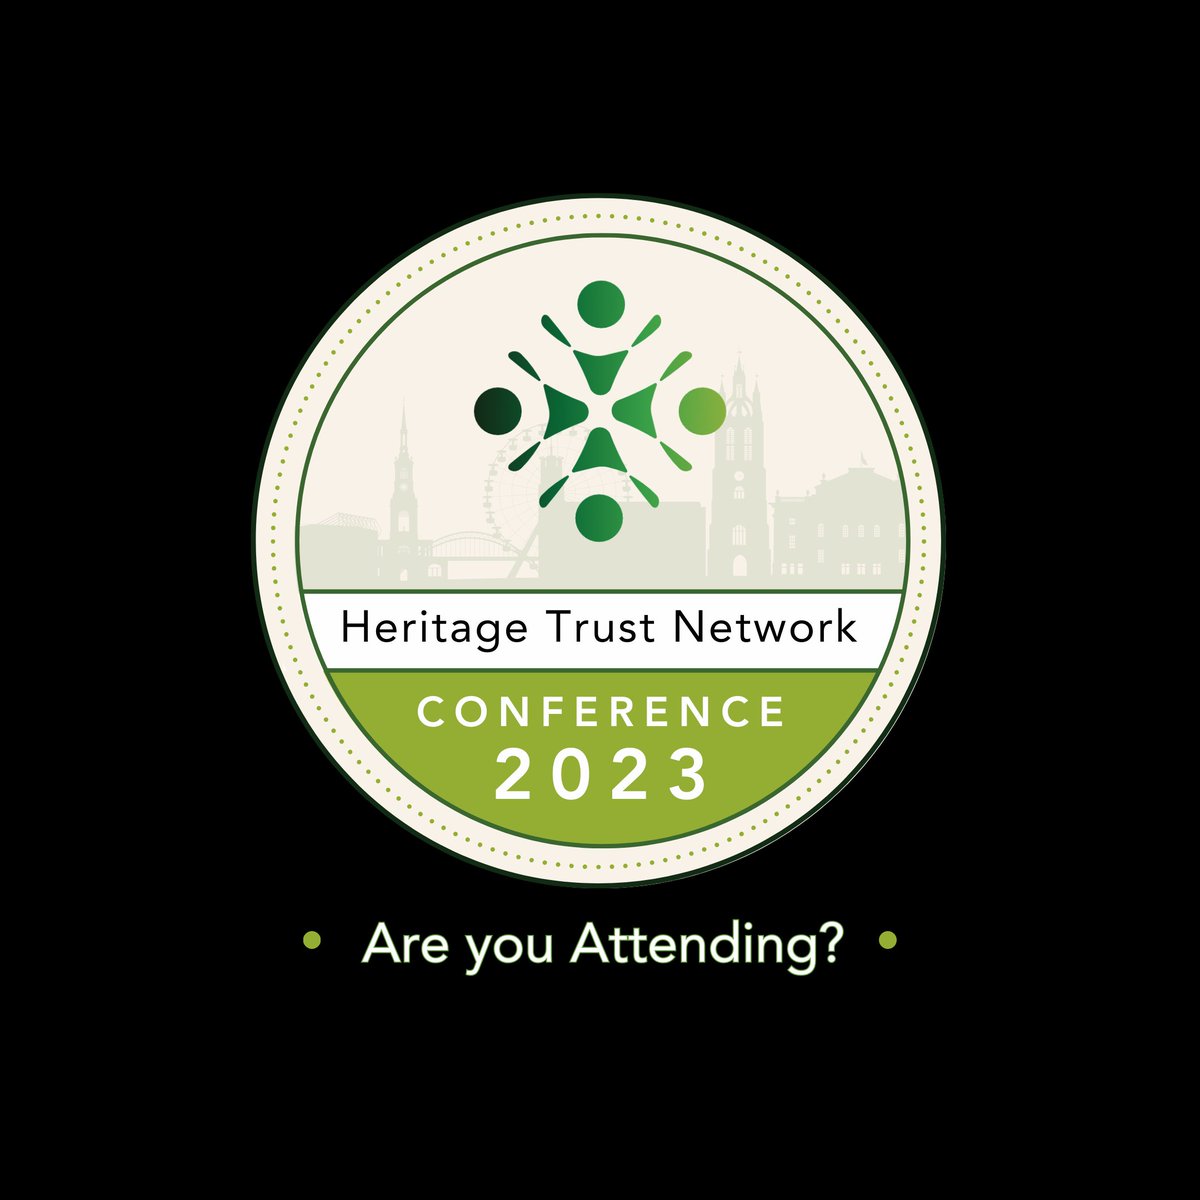 Have you booked yet? Tickets close on Wednesday- don't miss out on the best Heritage Networking event and conference of the year! #HTNConf23
heritagetrustnetwork.org.uk/conference-202…